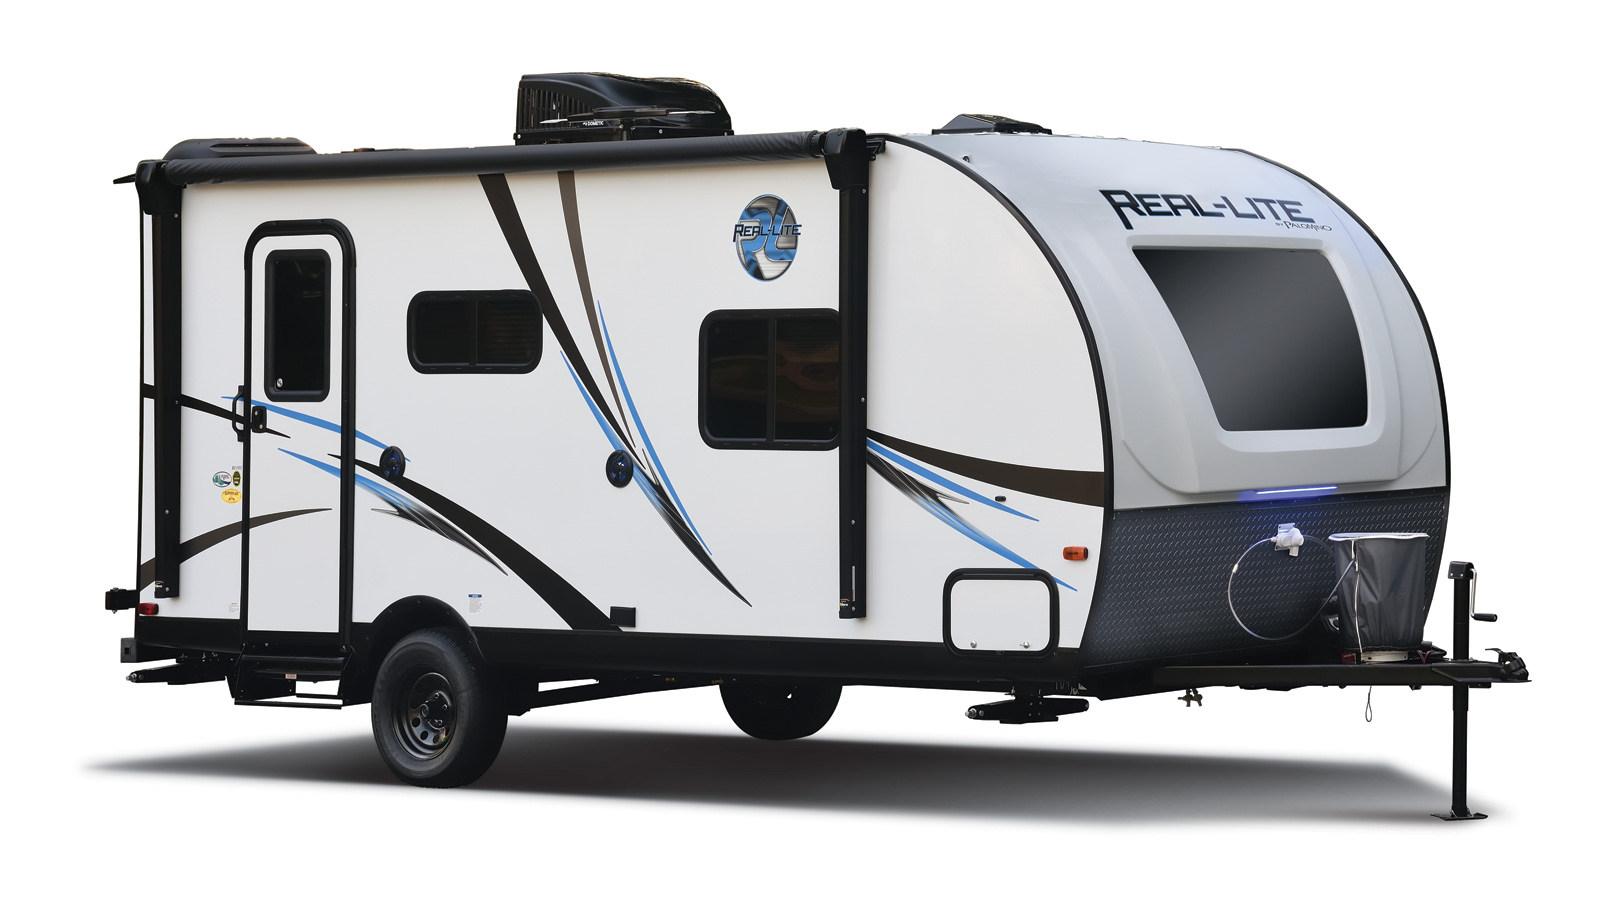 REAL-LITE TRAVEL TRAILERS